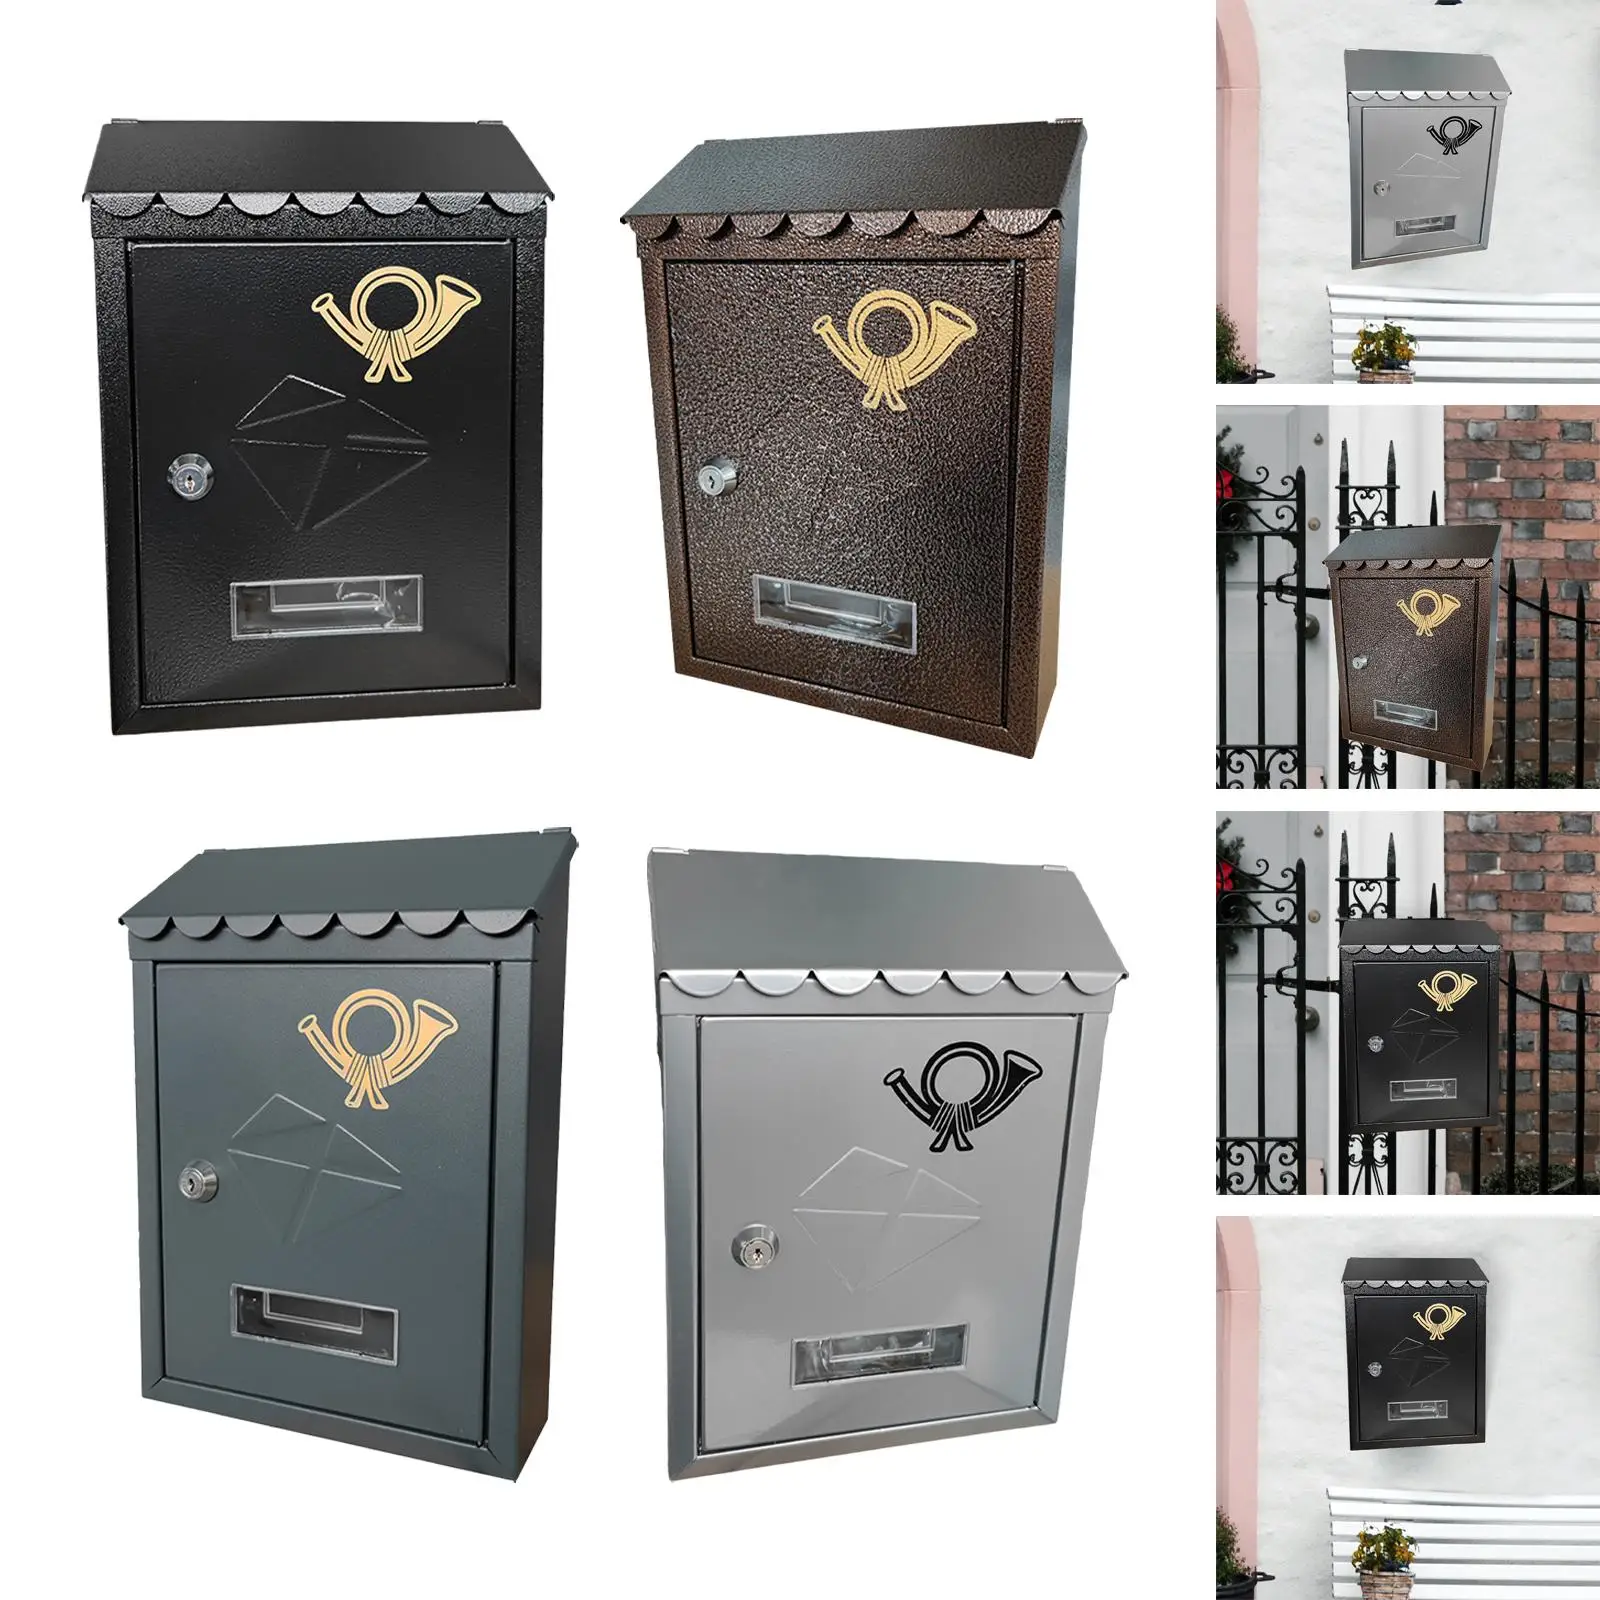 Wall Mount Mailbox Decorations Locking Decorative 21.5x7x30cm Outdoor Commercial Use with Key Front Door Metal Drop Box Mail Box